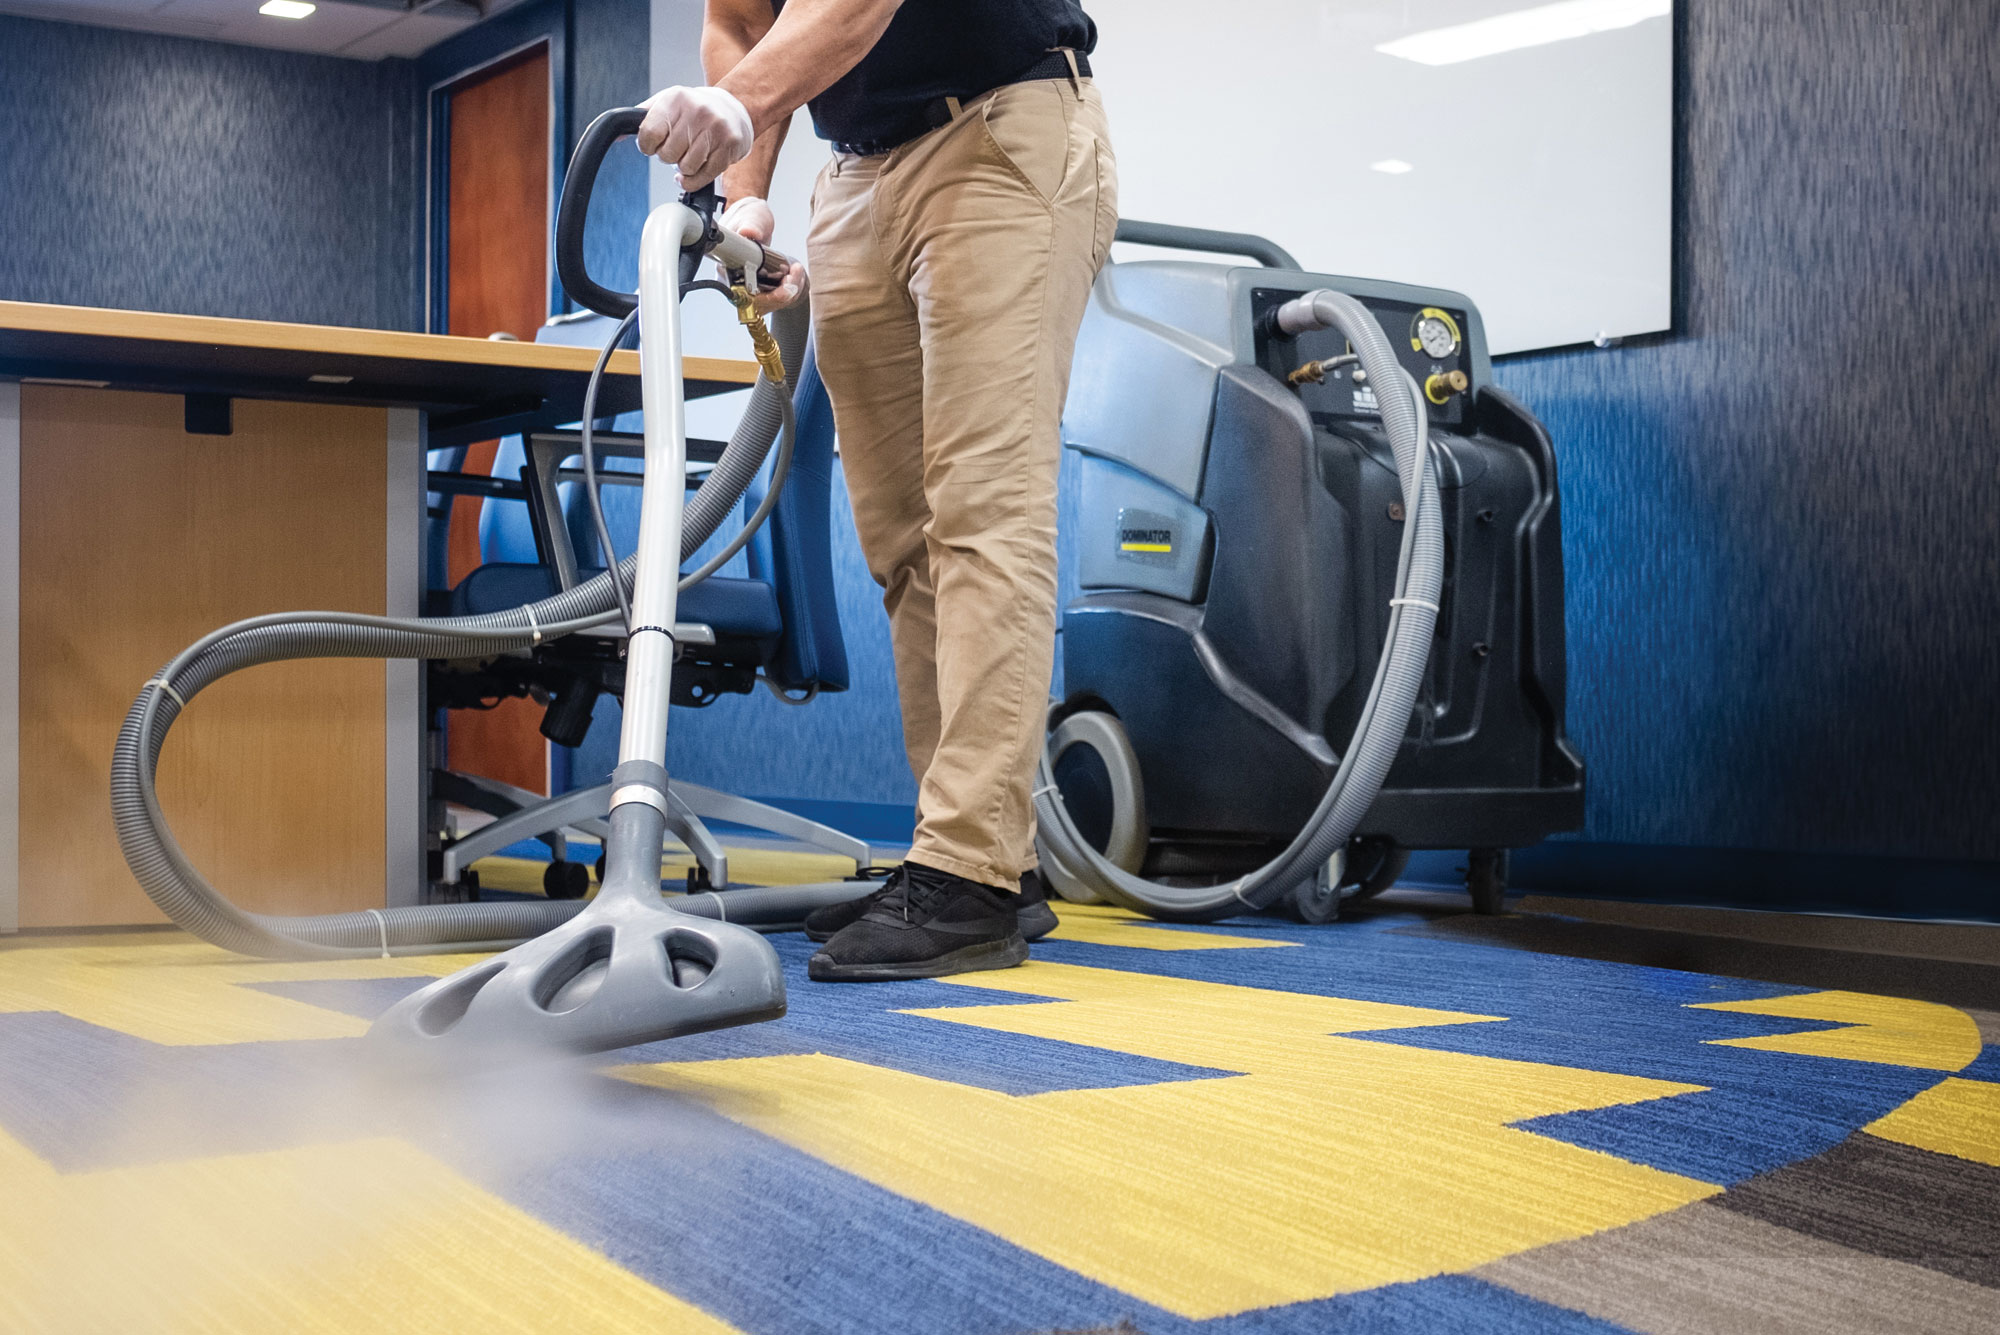 A person using a steam cleaner to clean a blue and yellow carpet.